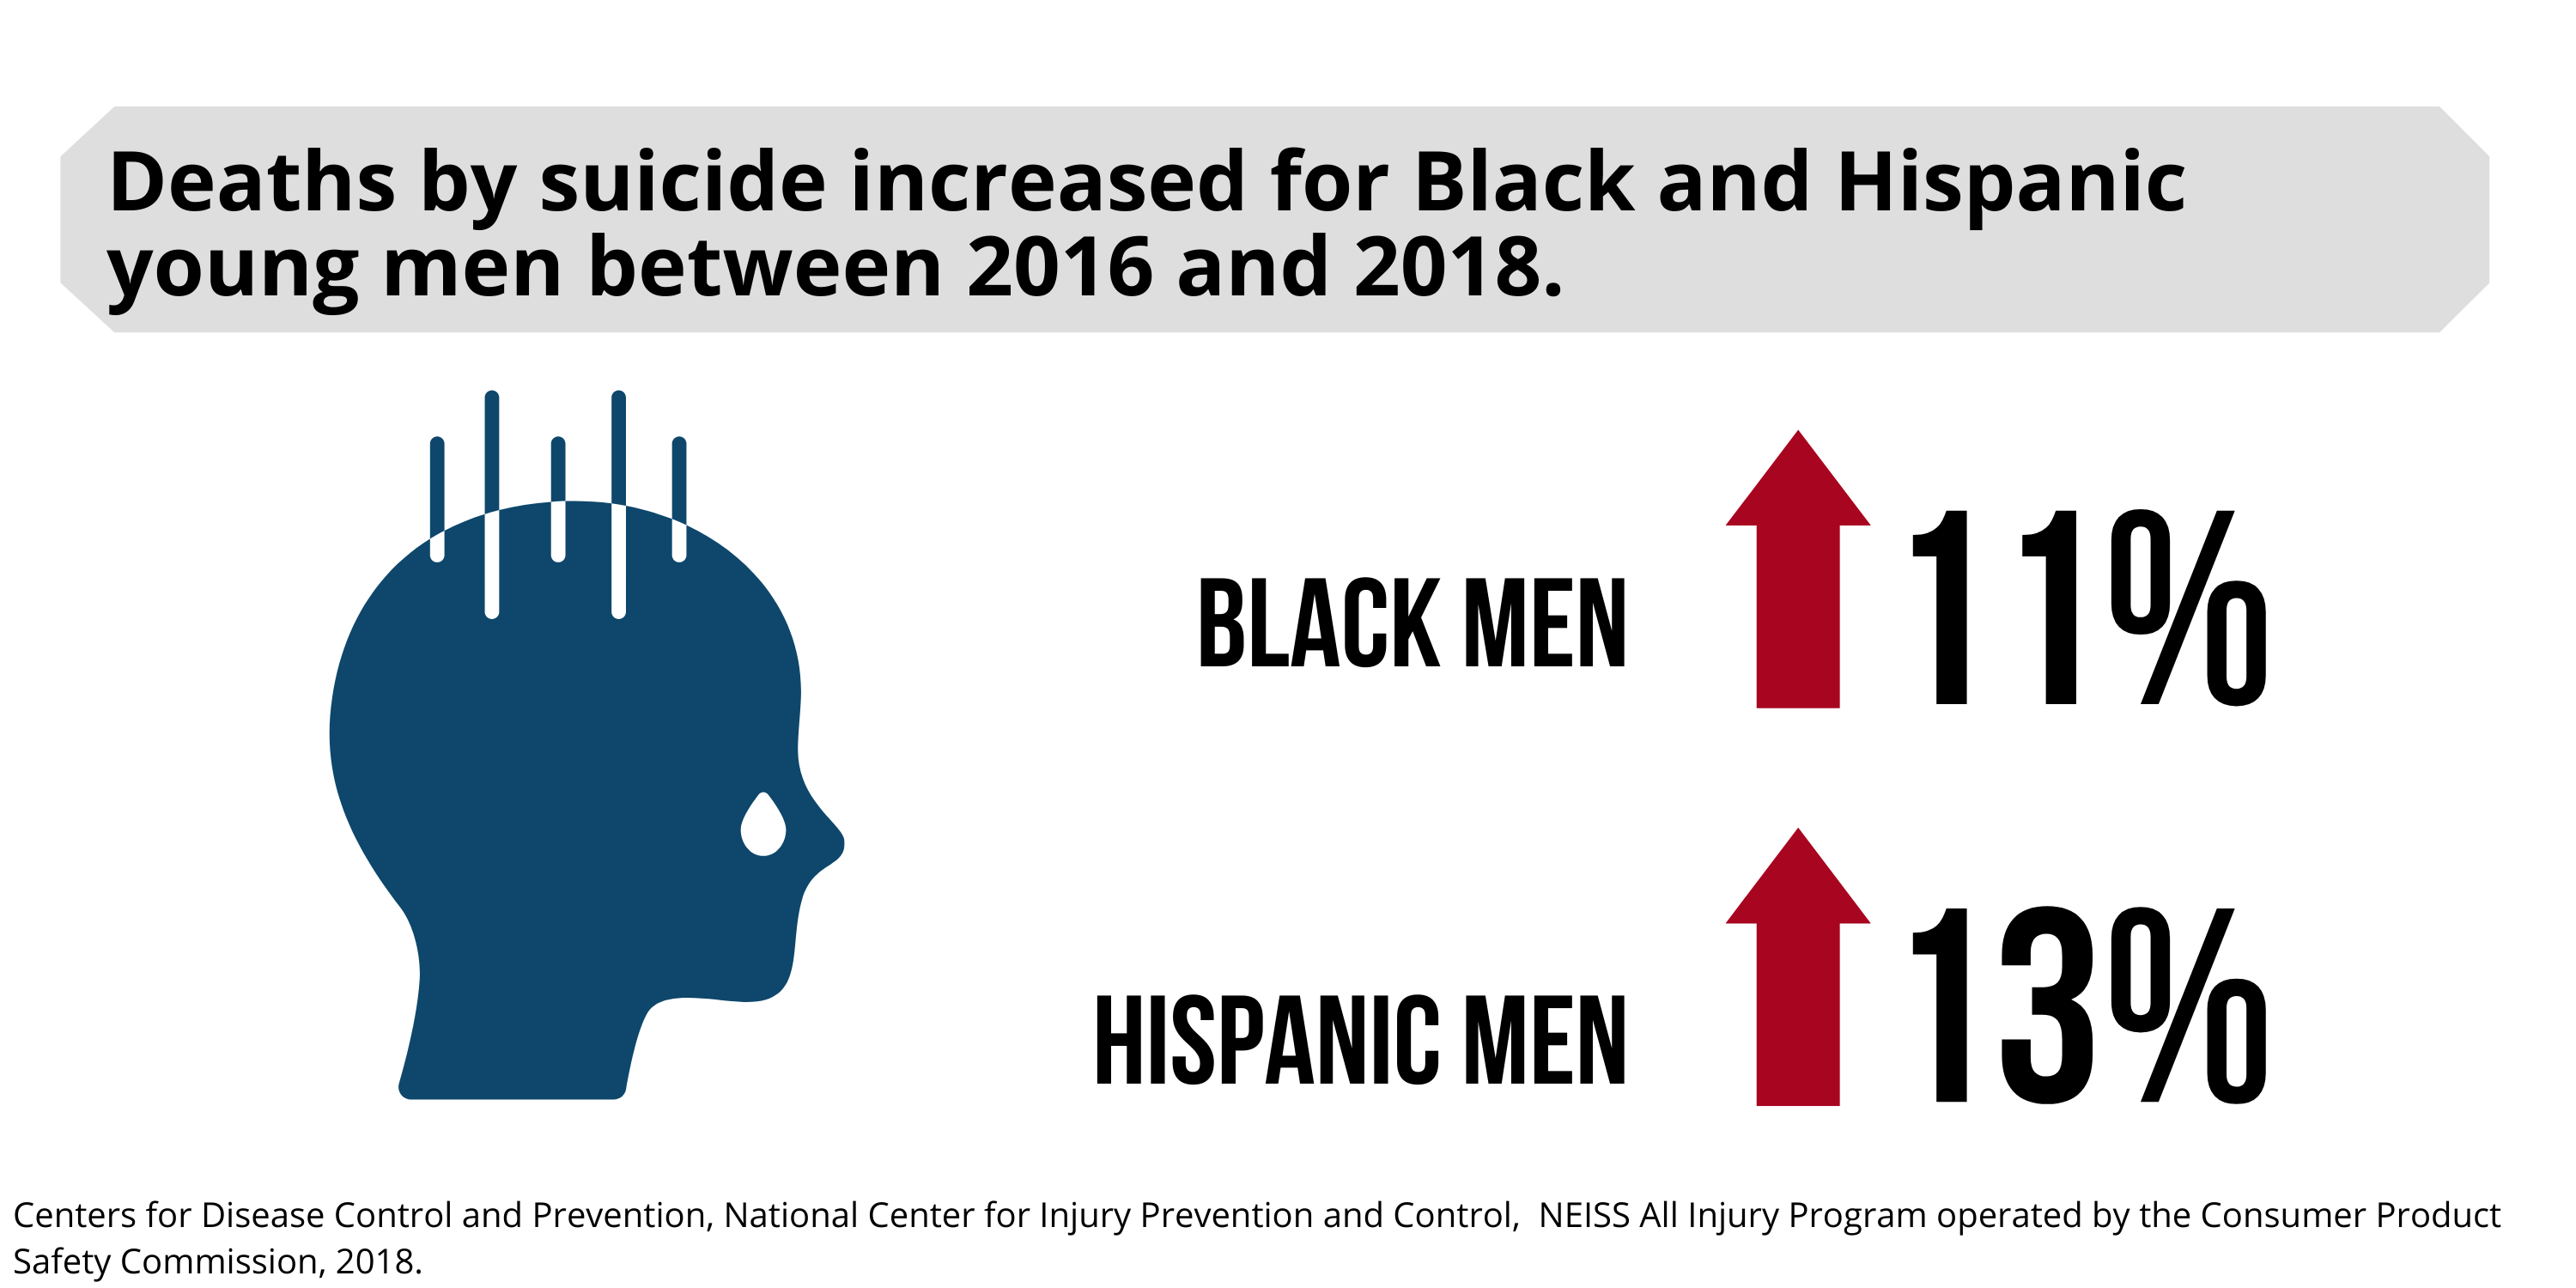 Deaths by suicide increased for Black and Hispanic young men between 2016 and 2018.